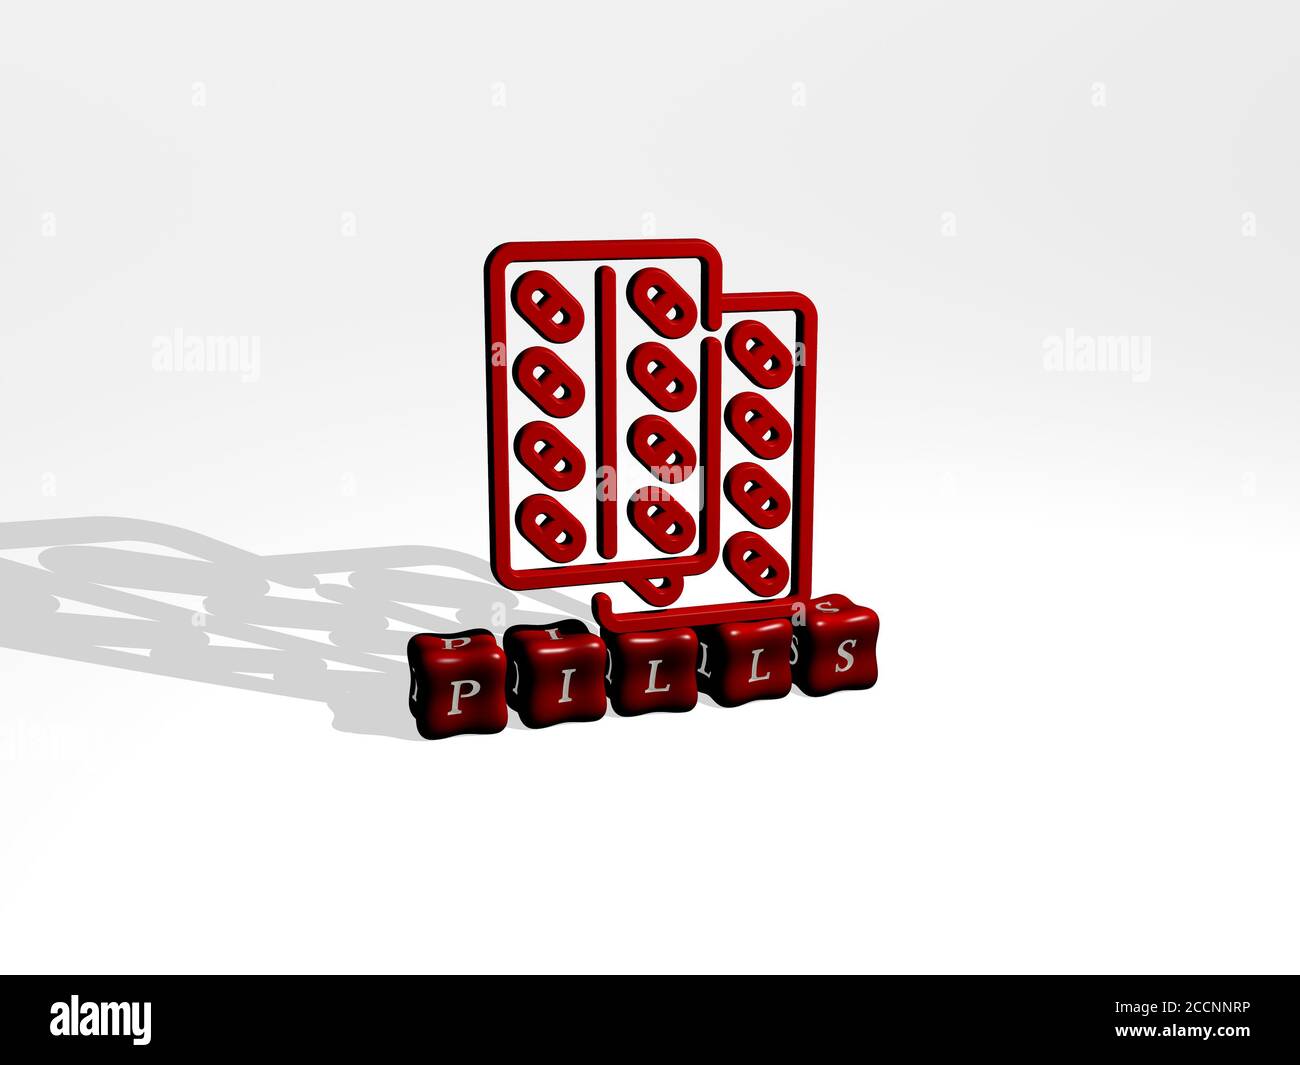 PILLS 3D icon object on text of cubic letters, 3D illustration Stock Photo